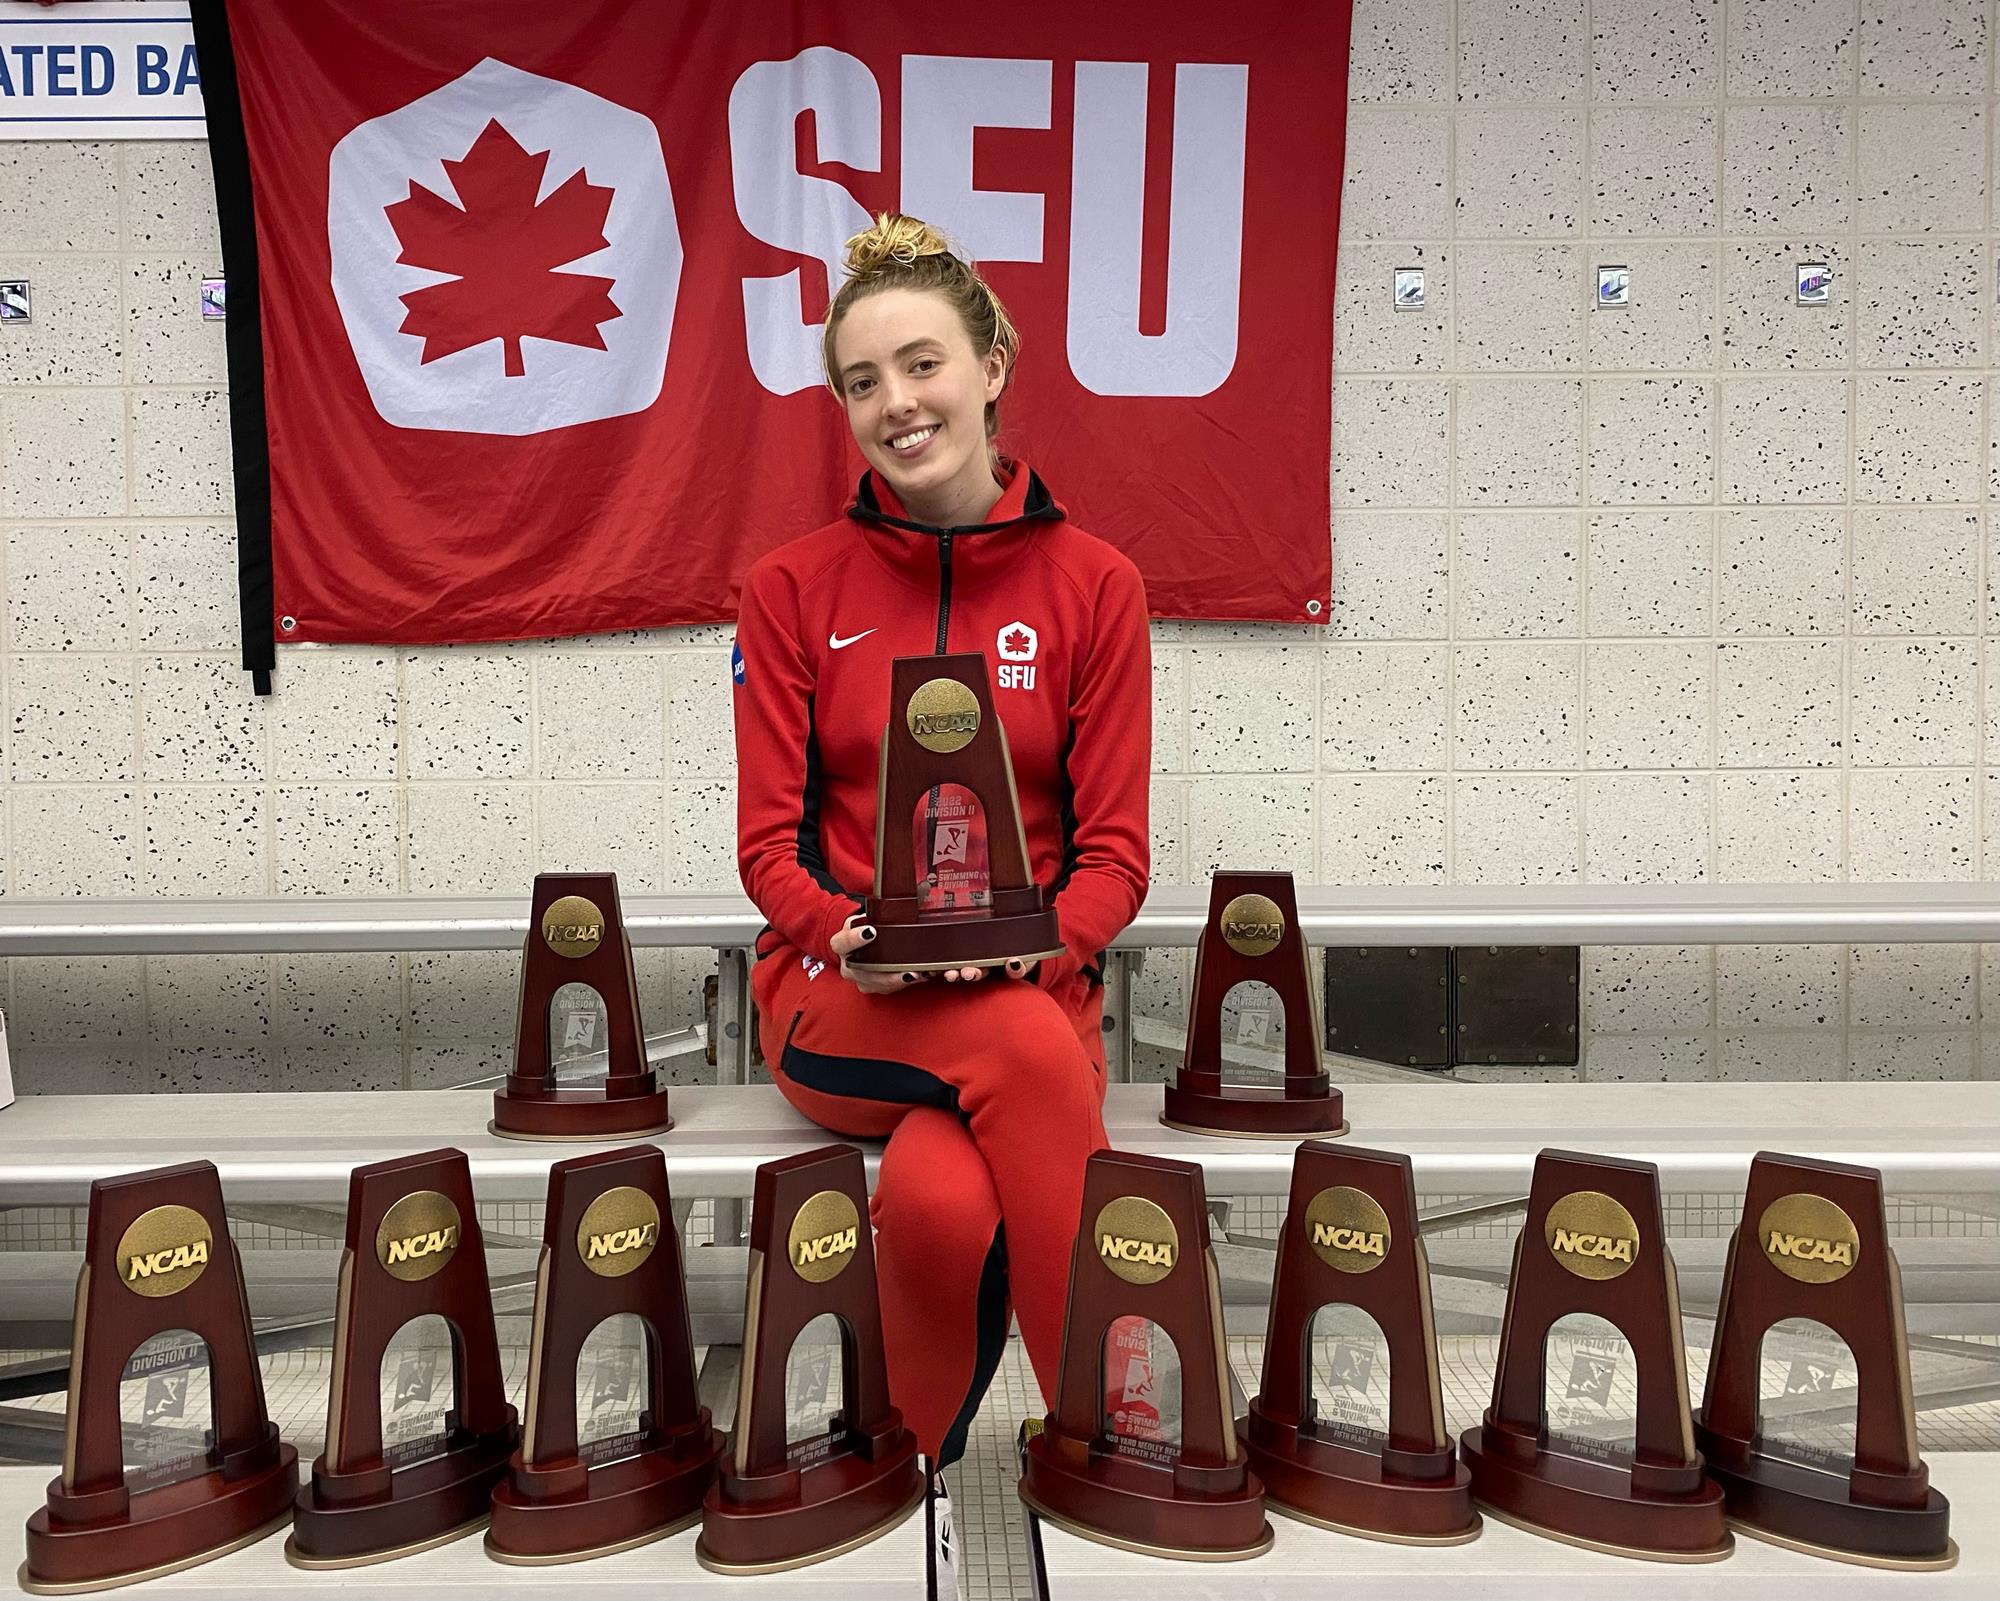 SFU swimmer Kayleigh Sharkey posing with her 11 trophies